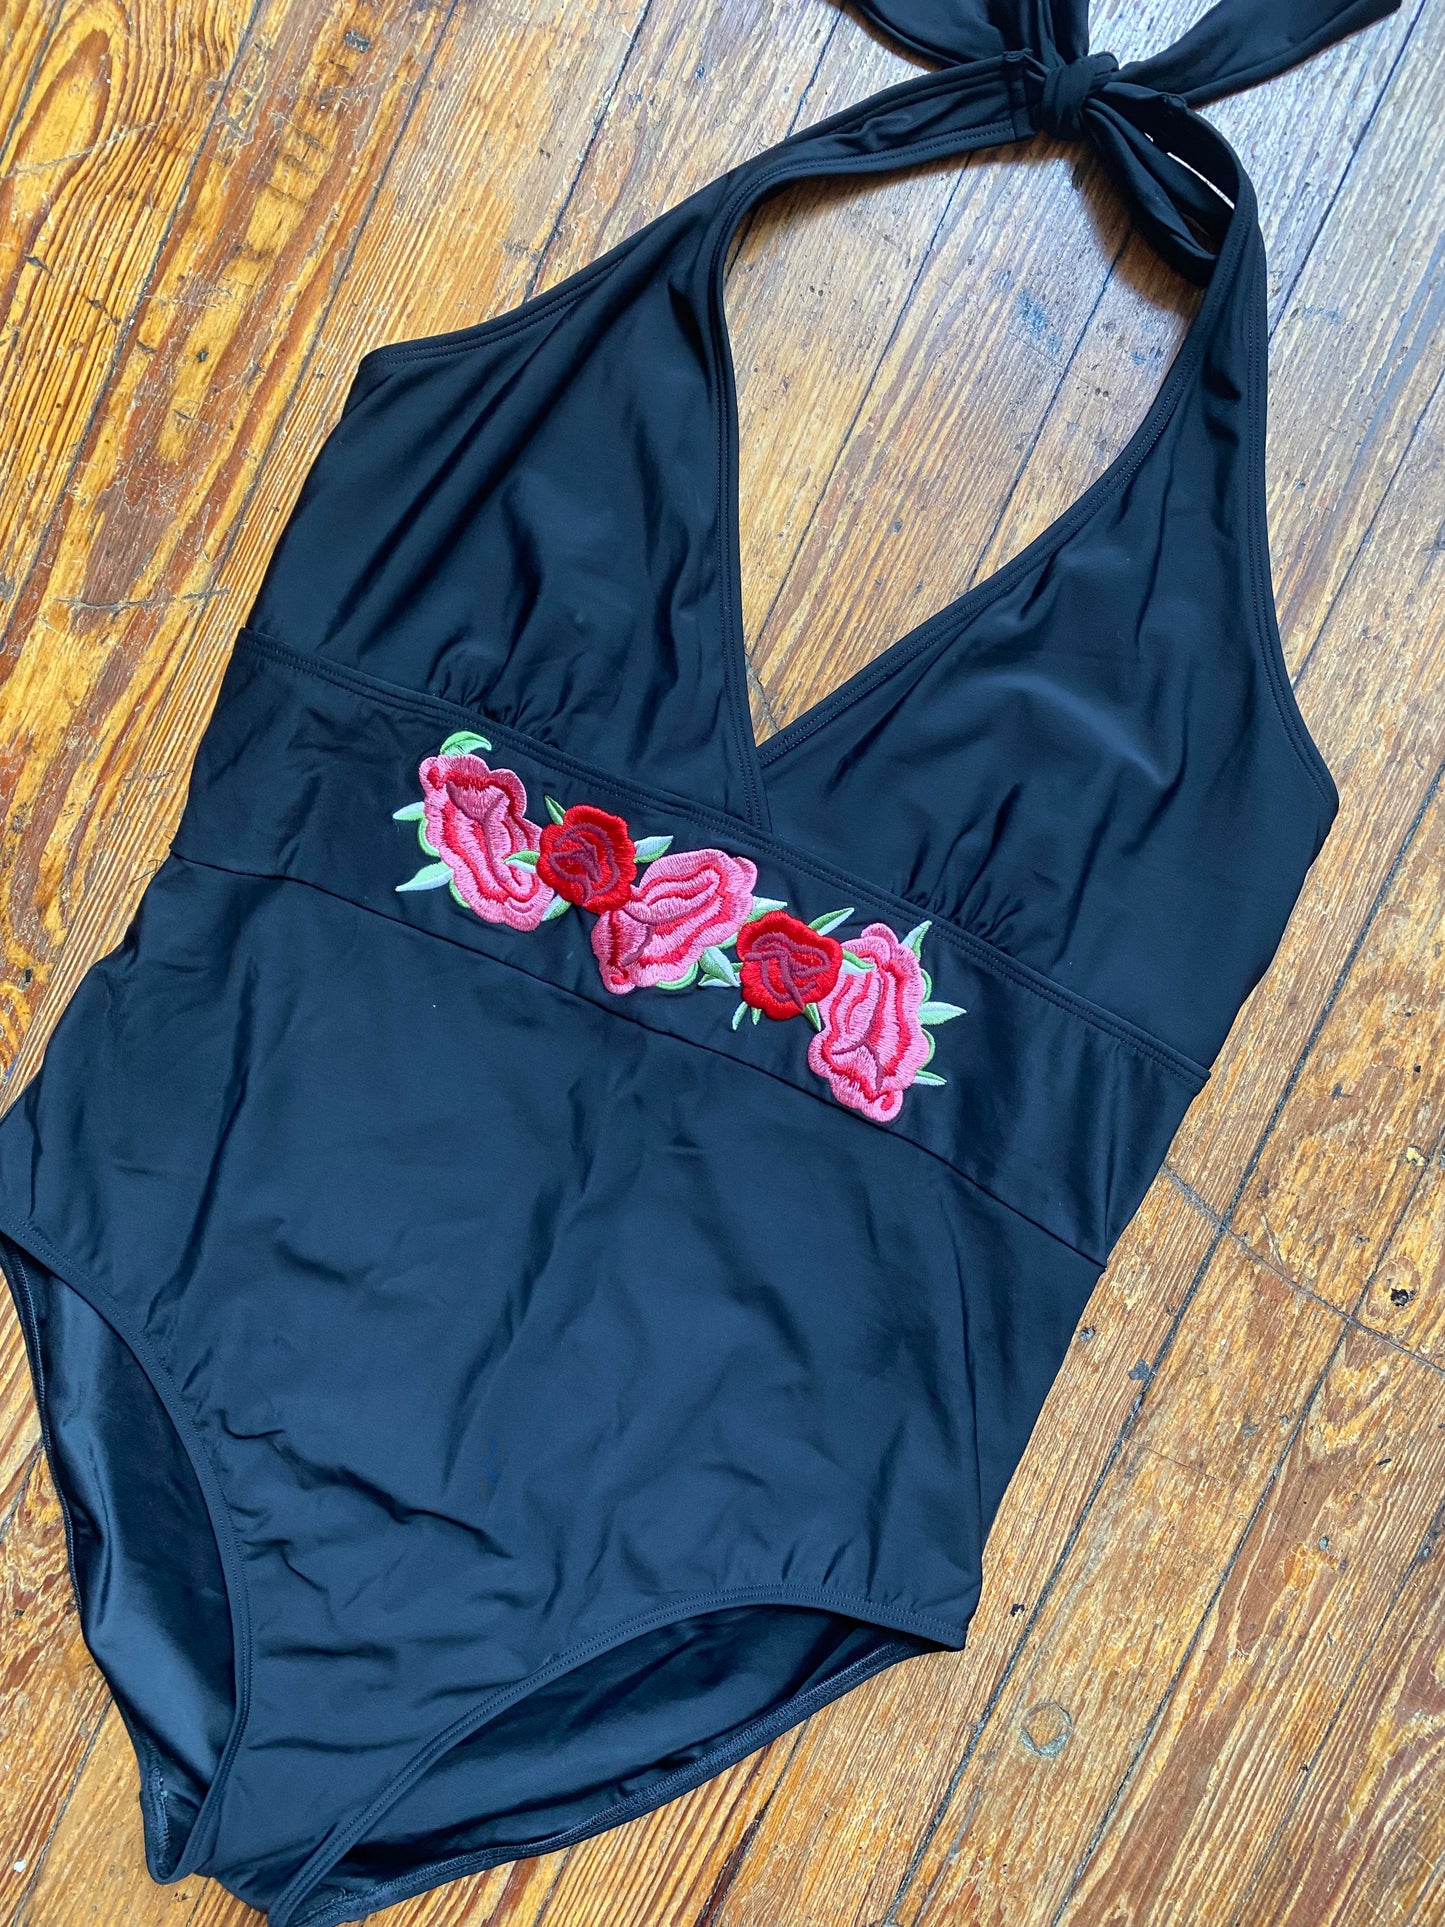 Black w/ Floral Embroidery One Piece Halter Swimsuit